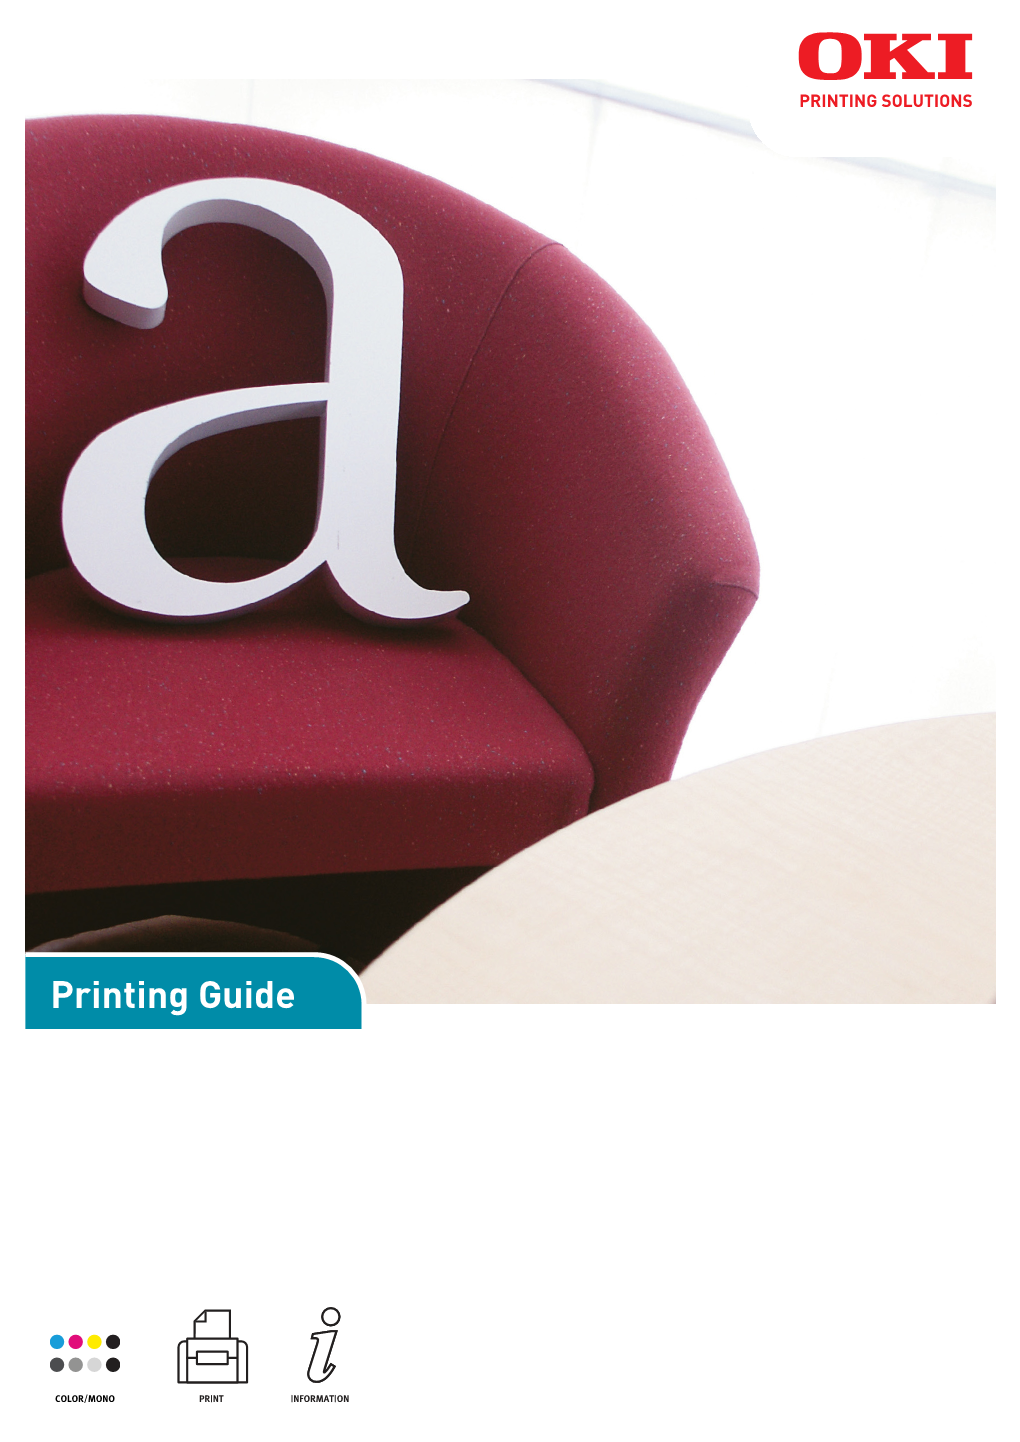 Printing Guide PREFACE Every Effort Has Been Made to Ensure That the Information in This Document Is Complete, Accurate, and Up-To-Date